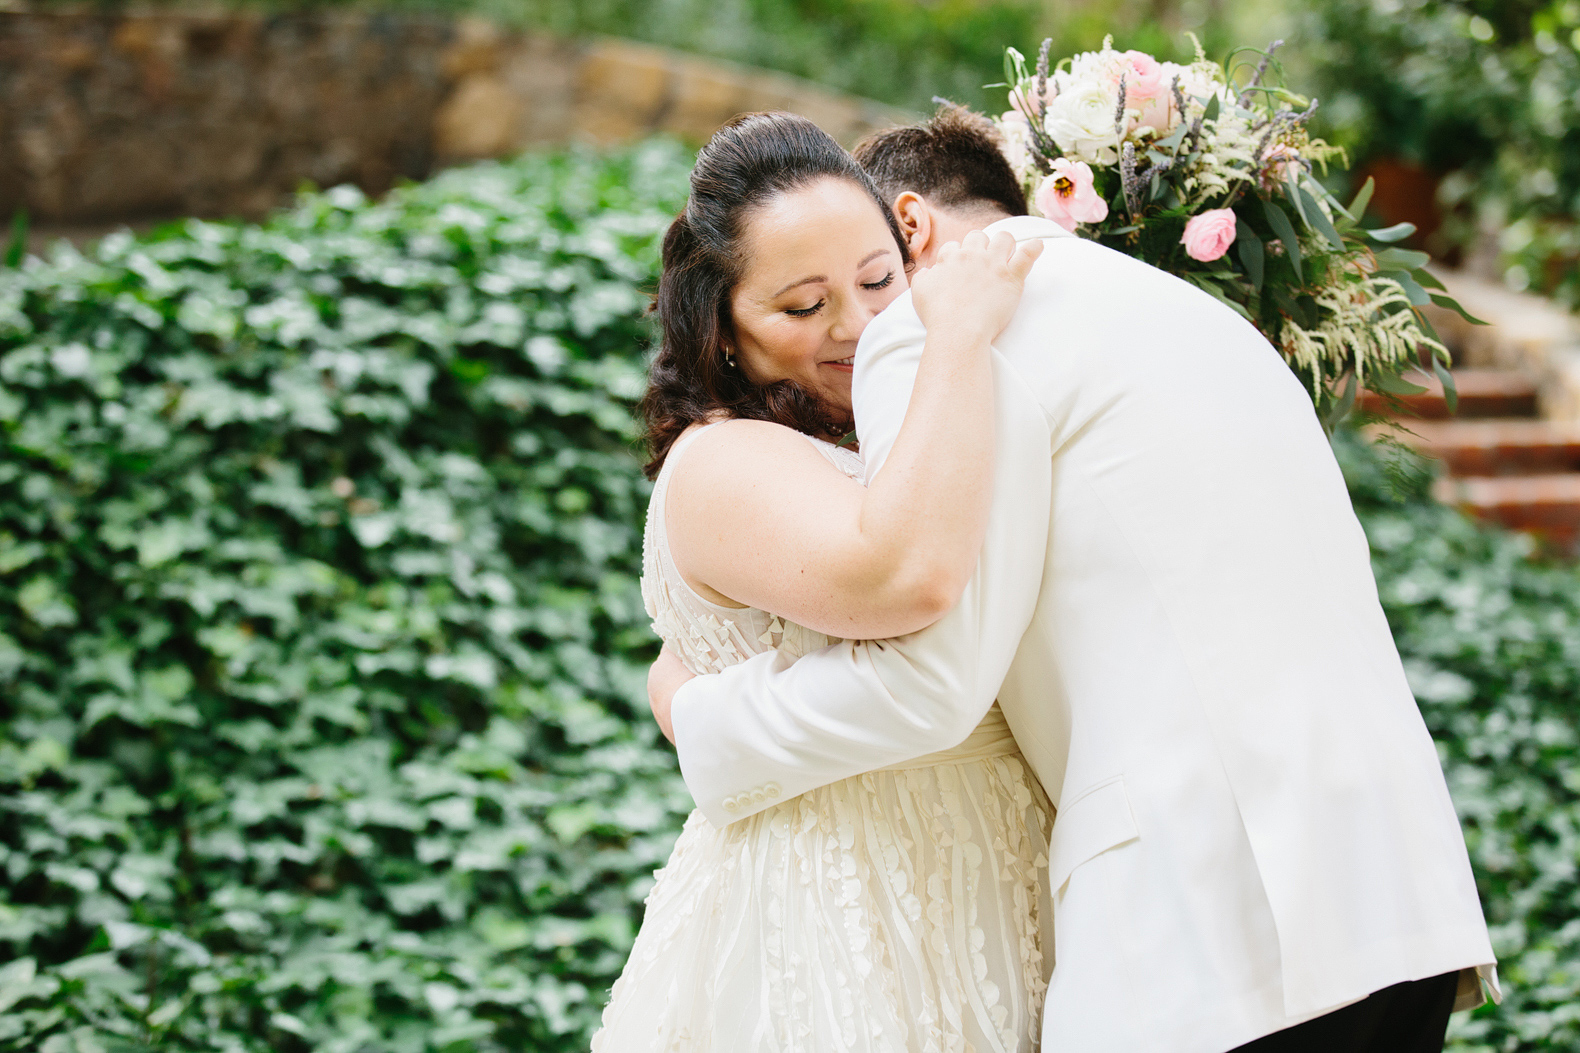 A sweet moment between the bride and groom. 